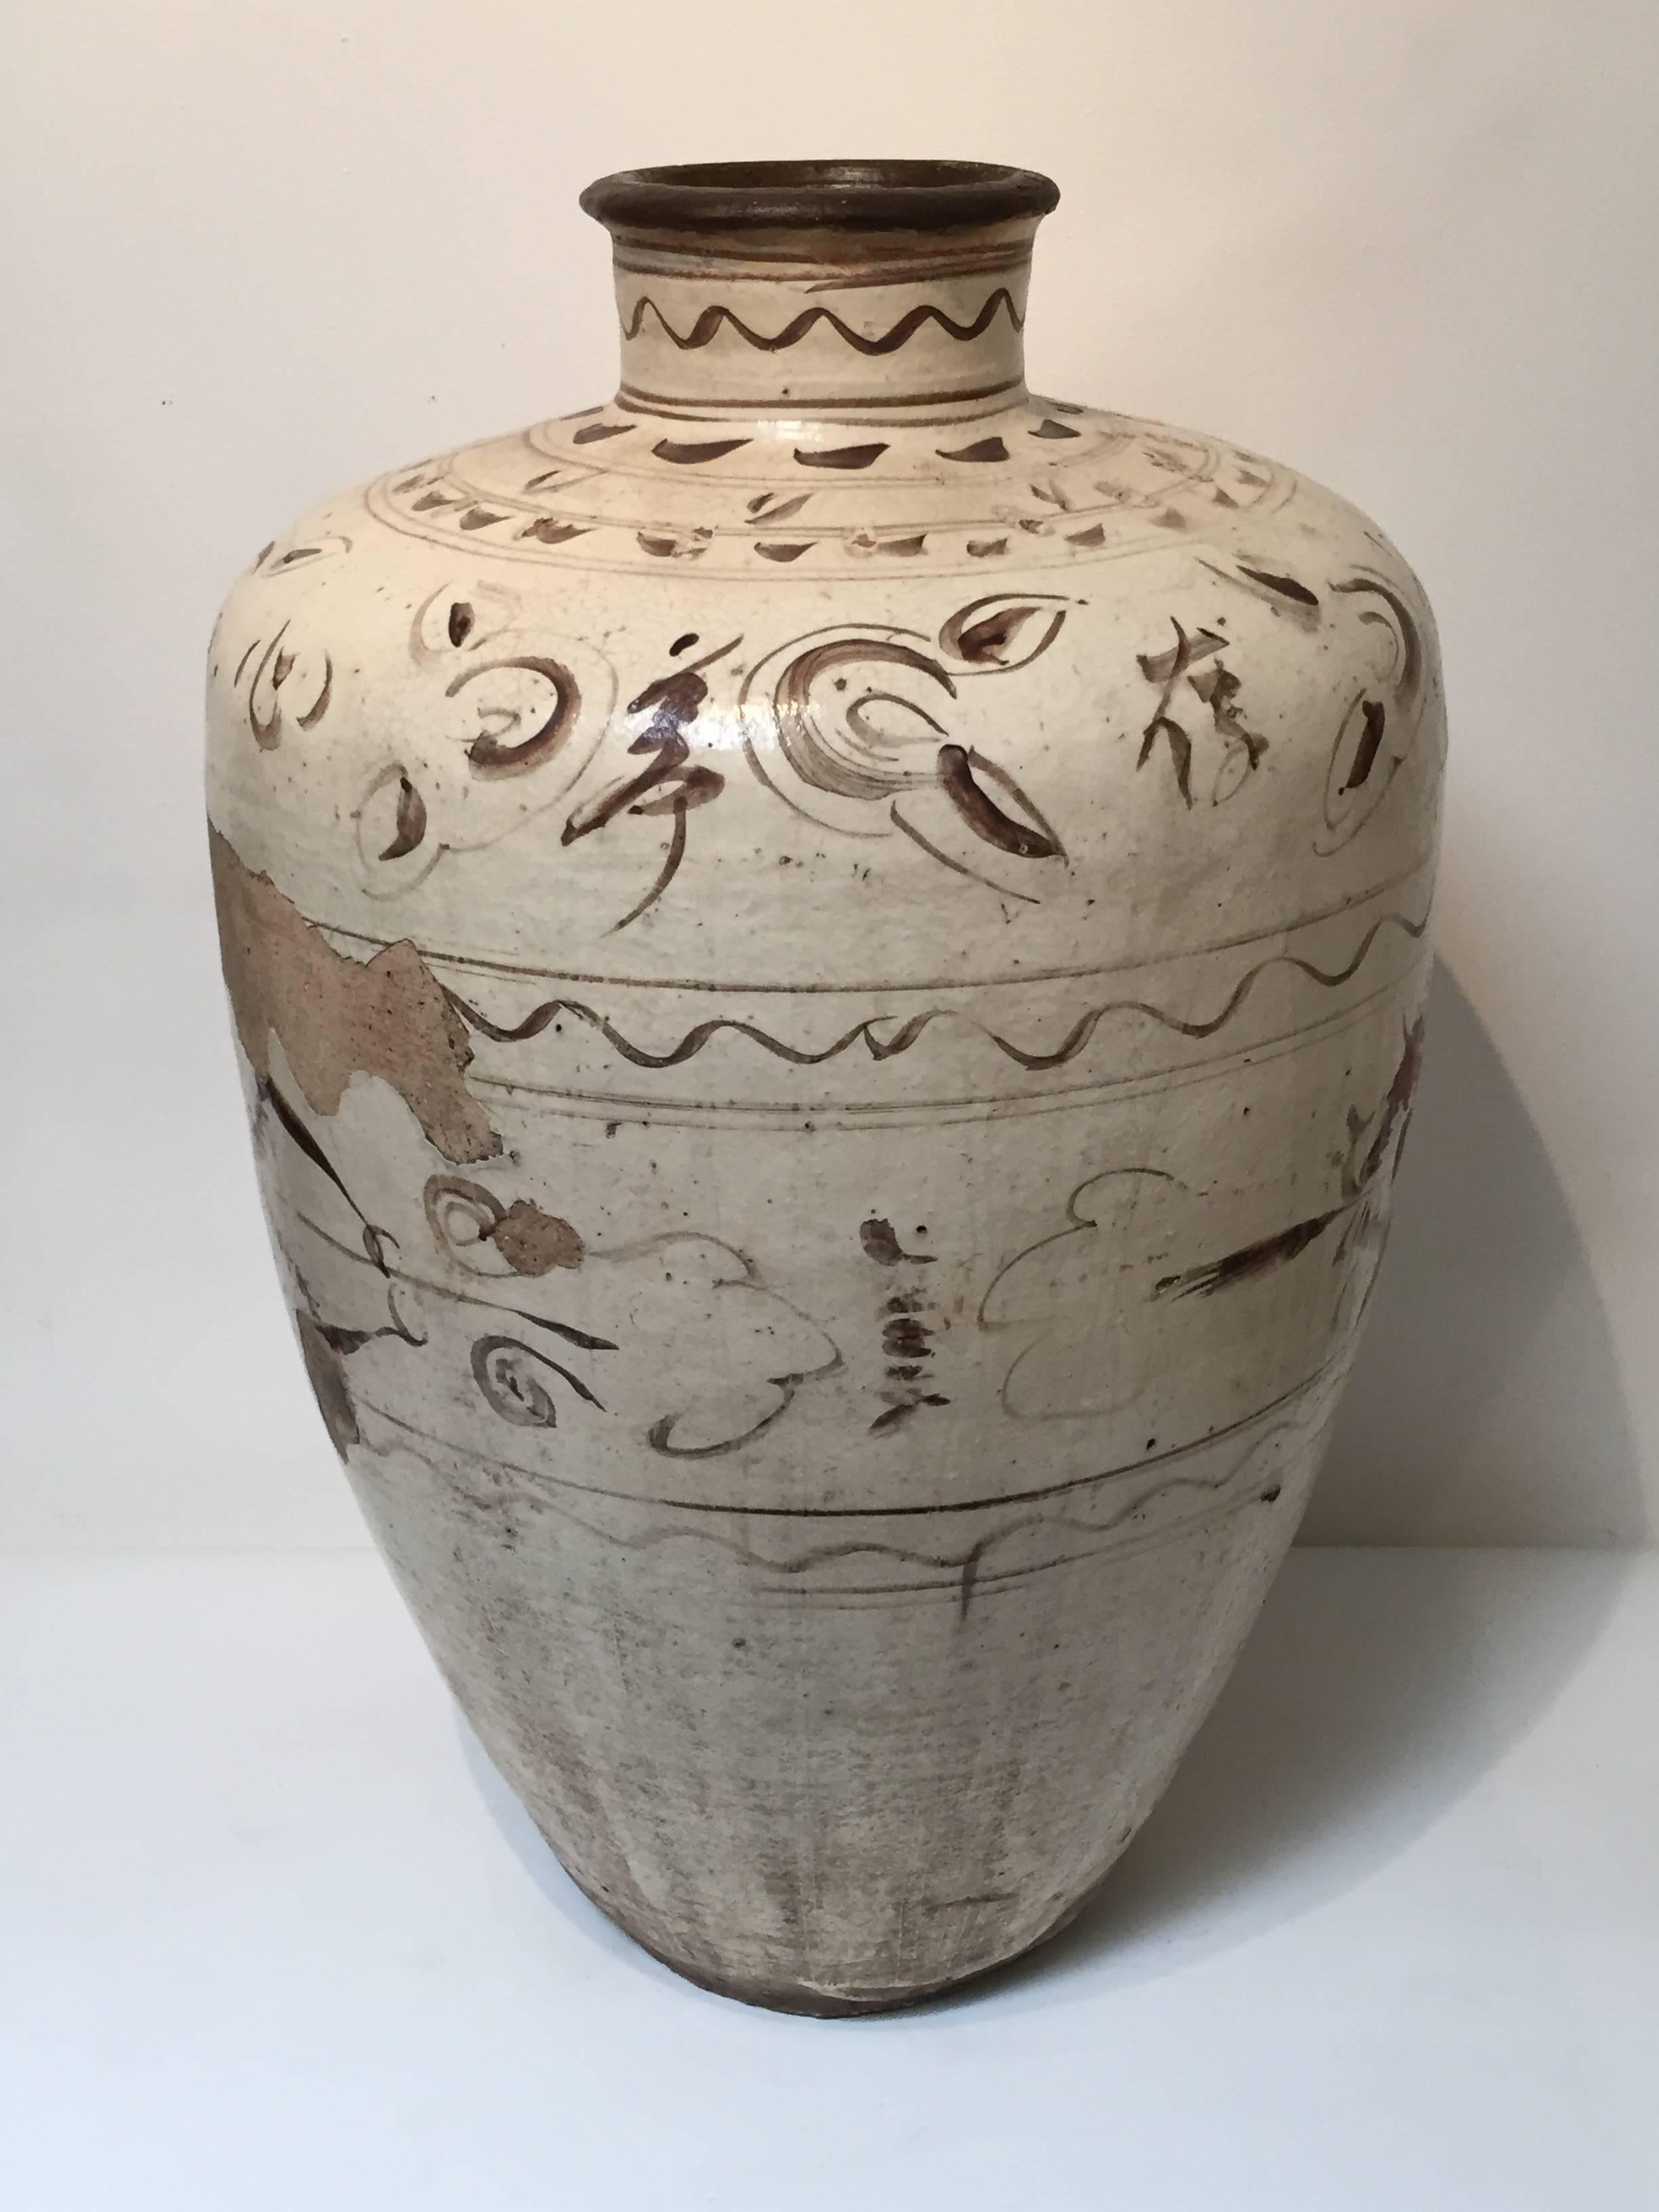 A large Chizhou storage jar from the Yuan dynasty (1271-1368).
A heavy cream-colored glaze as background, with abstract designs in a chocolate glaze. 
Measures: 26.5 